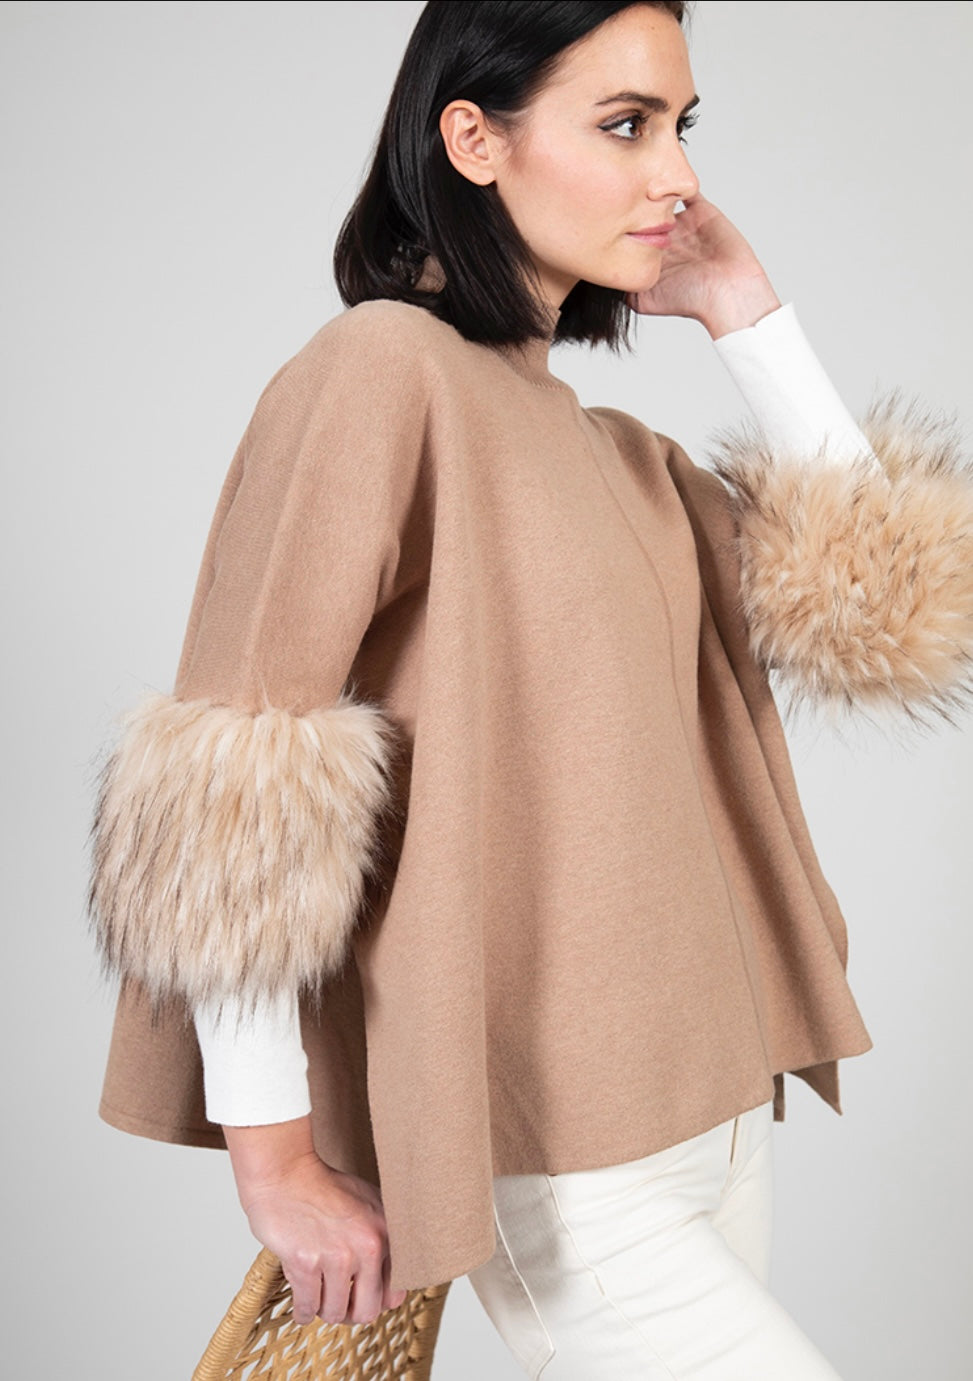 OST Relaxed Sweater w/ Faux Fur